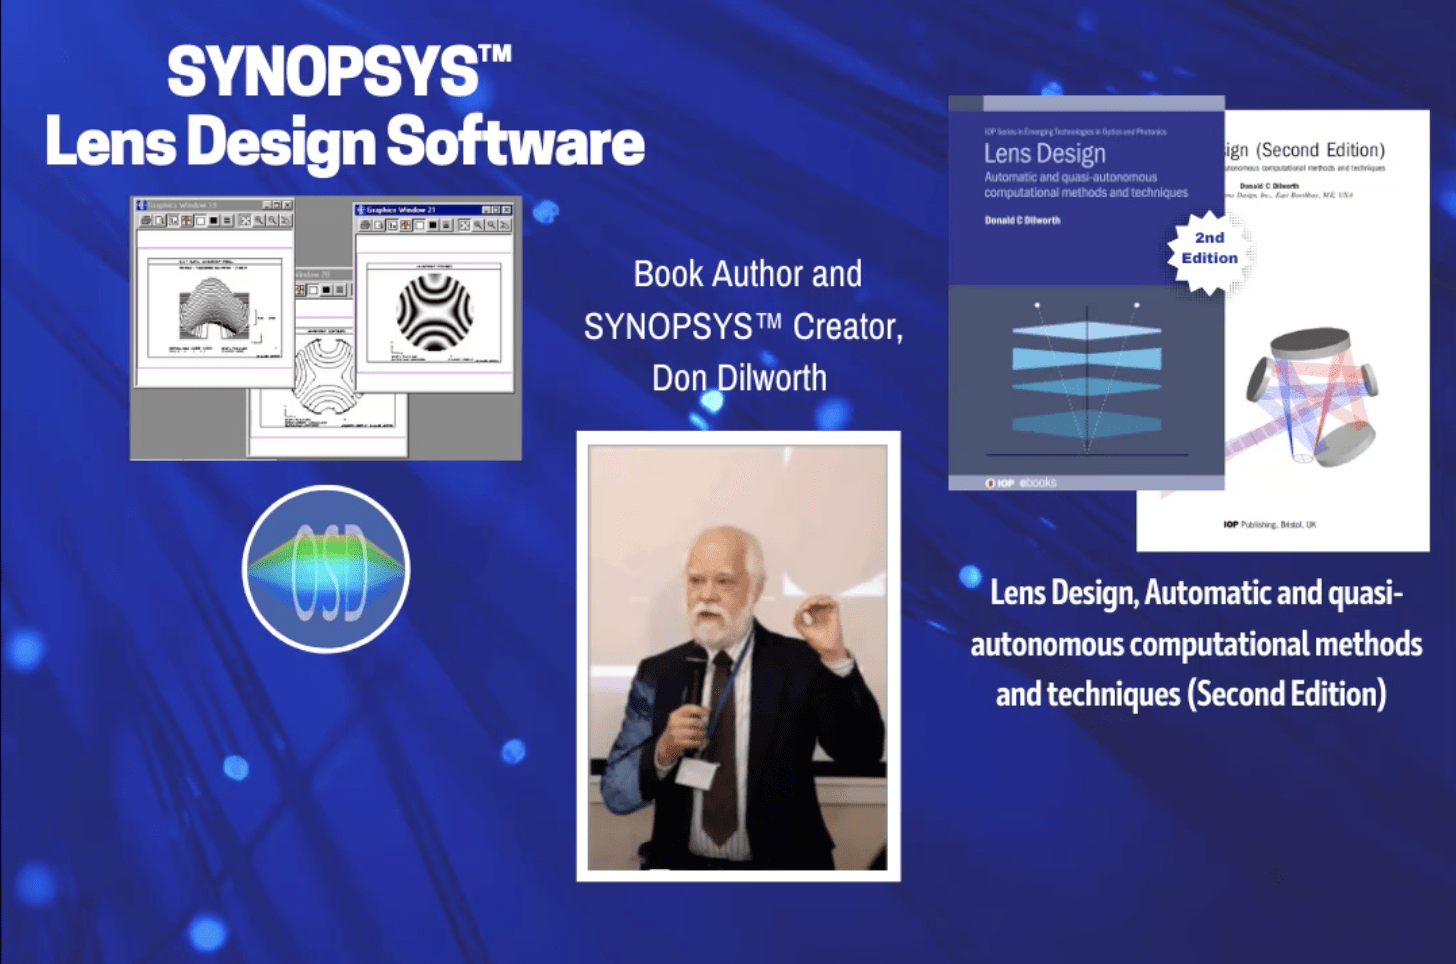 Don Dilworth, Creator of SYNOPSYS™ Lens Design Software